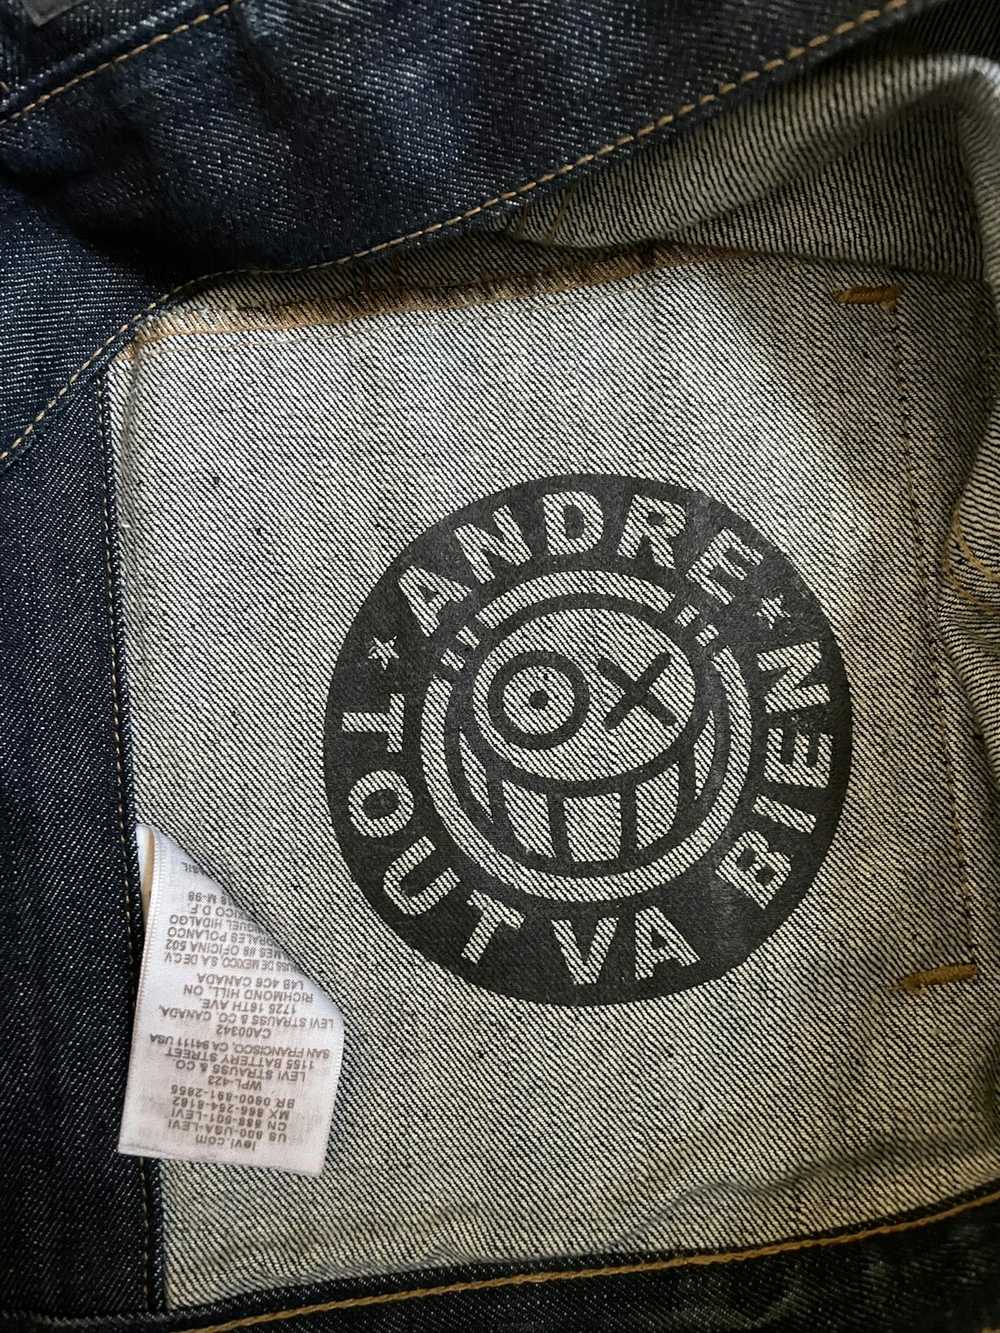 Levi's VERY RARE Andre x Levis Jacket 1/50 - image 8